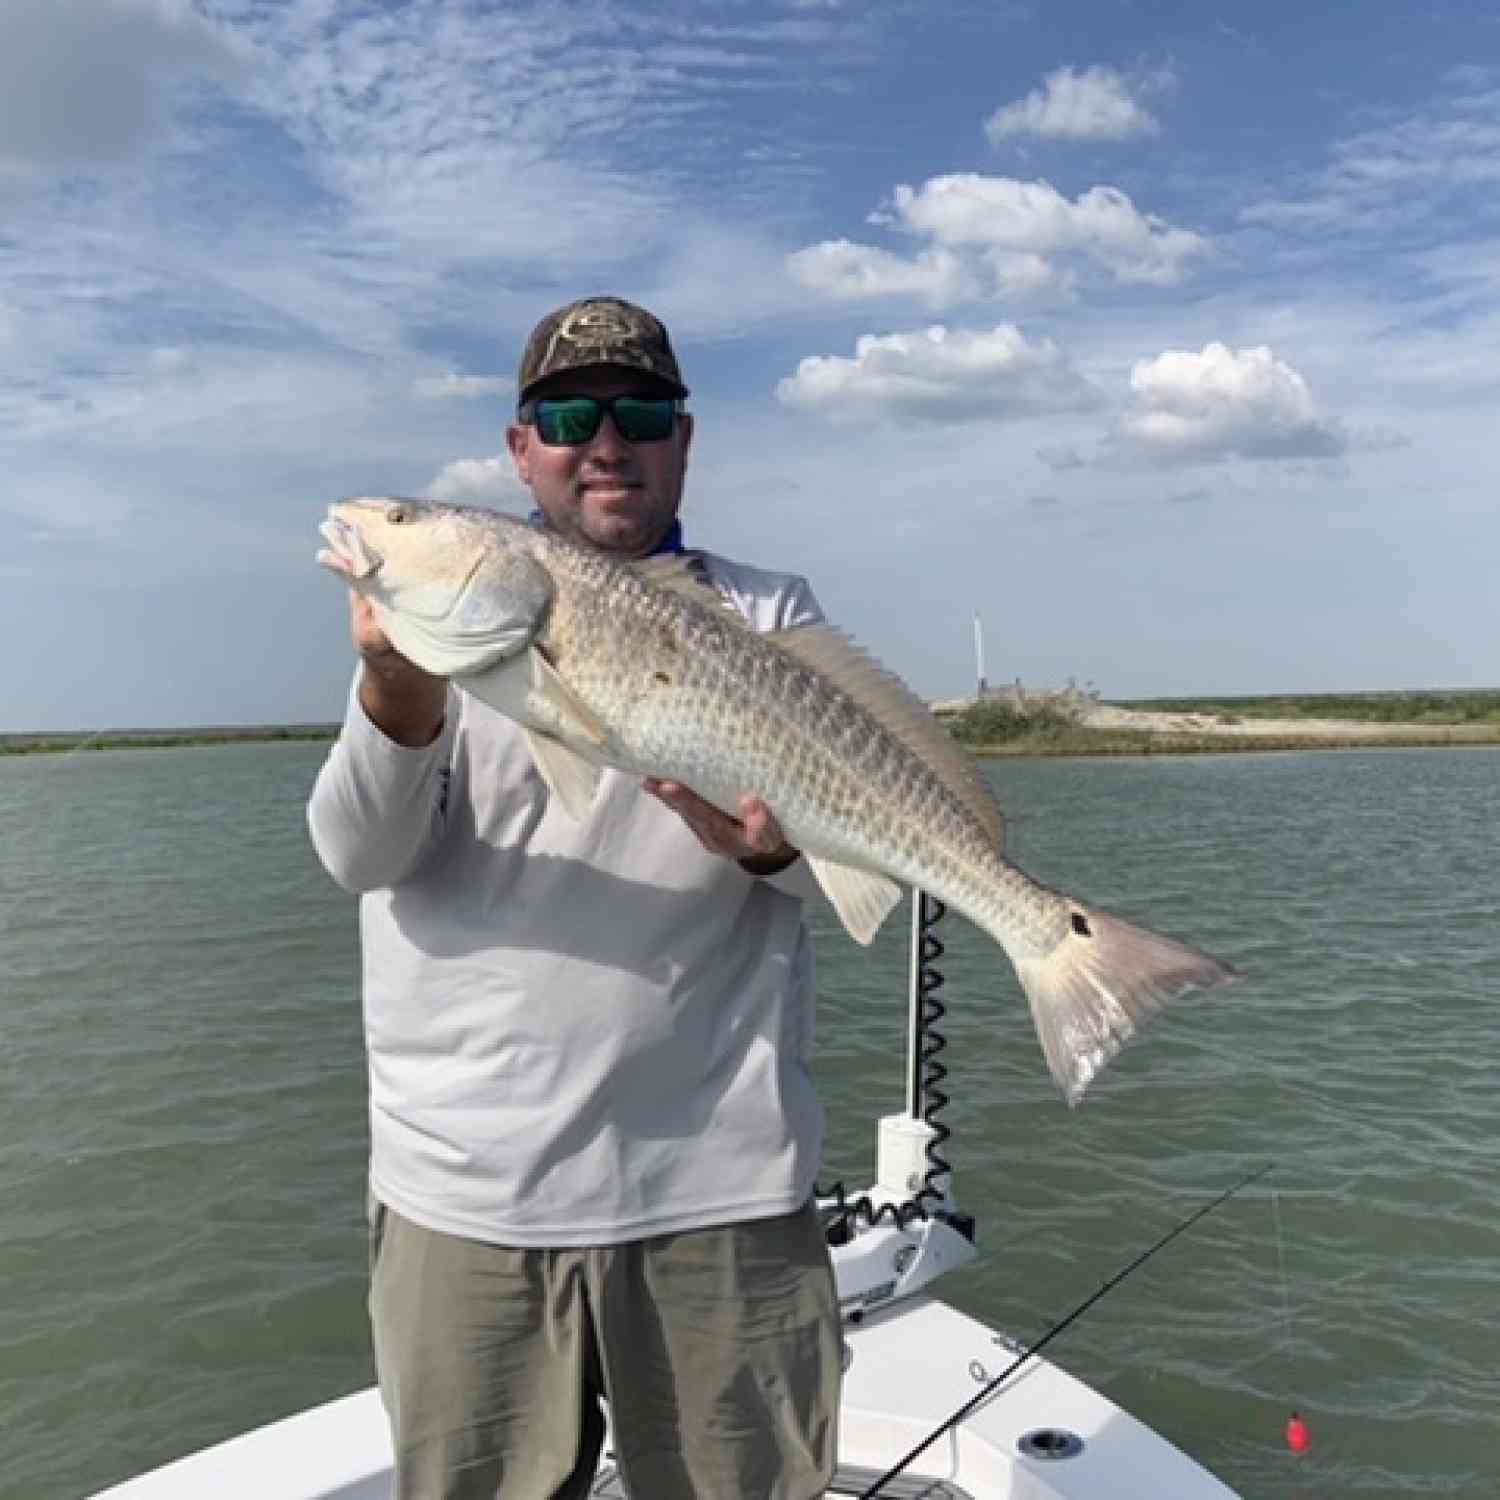 Catching Reds in POC during the 3rd Annual Sportsman Boat Owner’s Fall Fishing Bash!